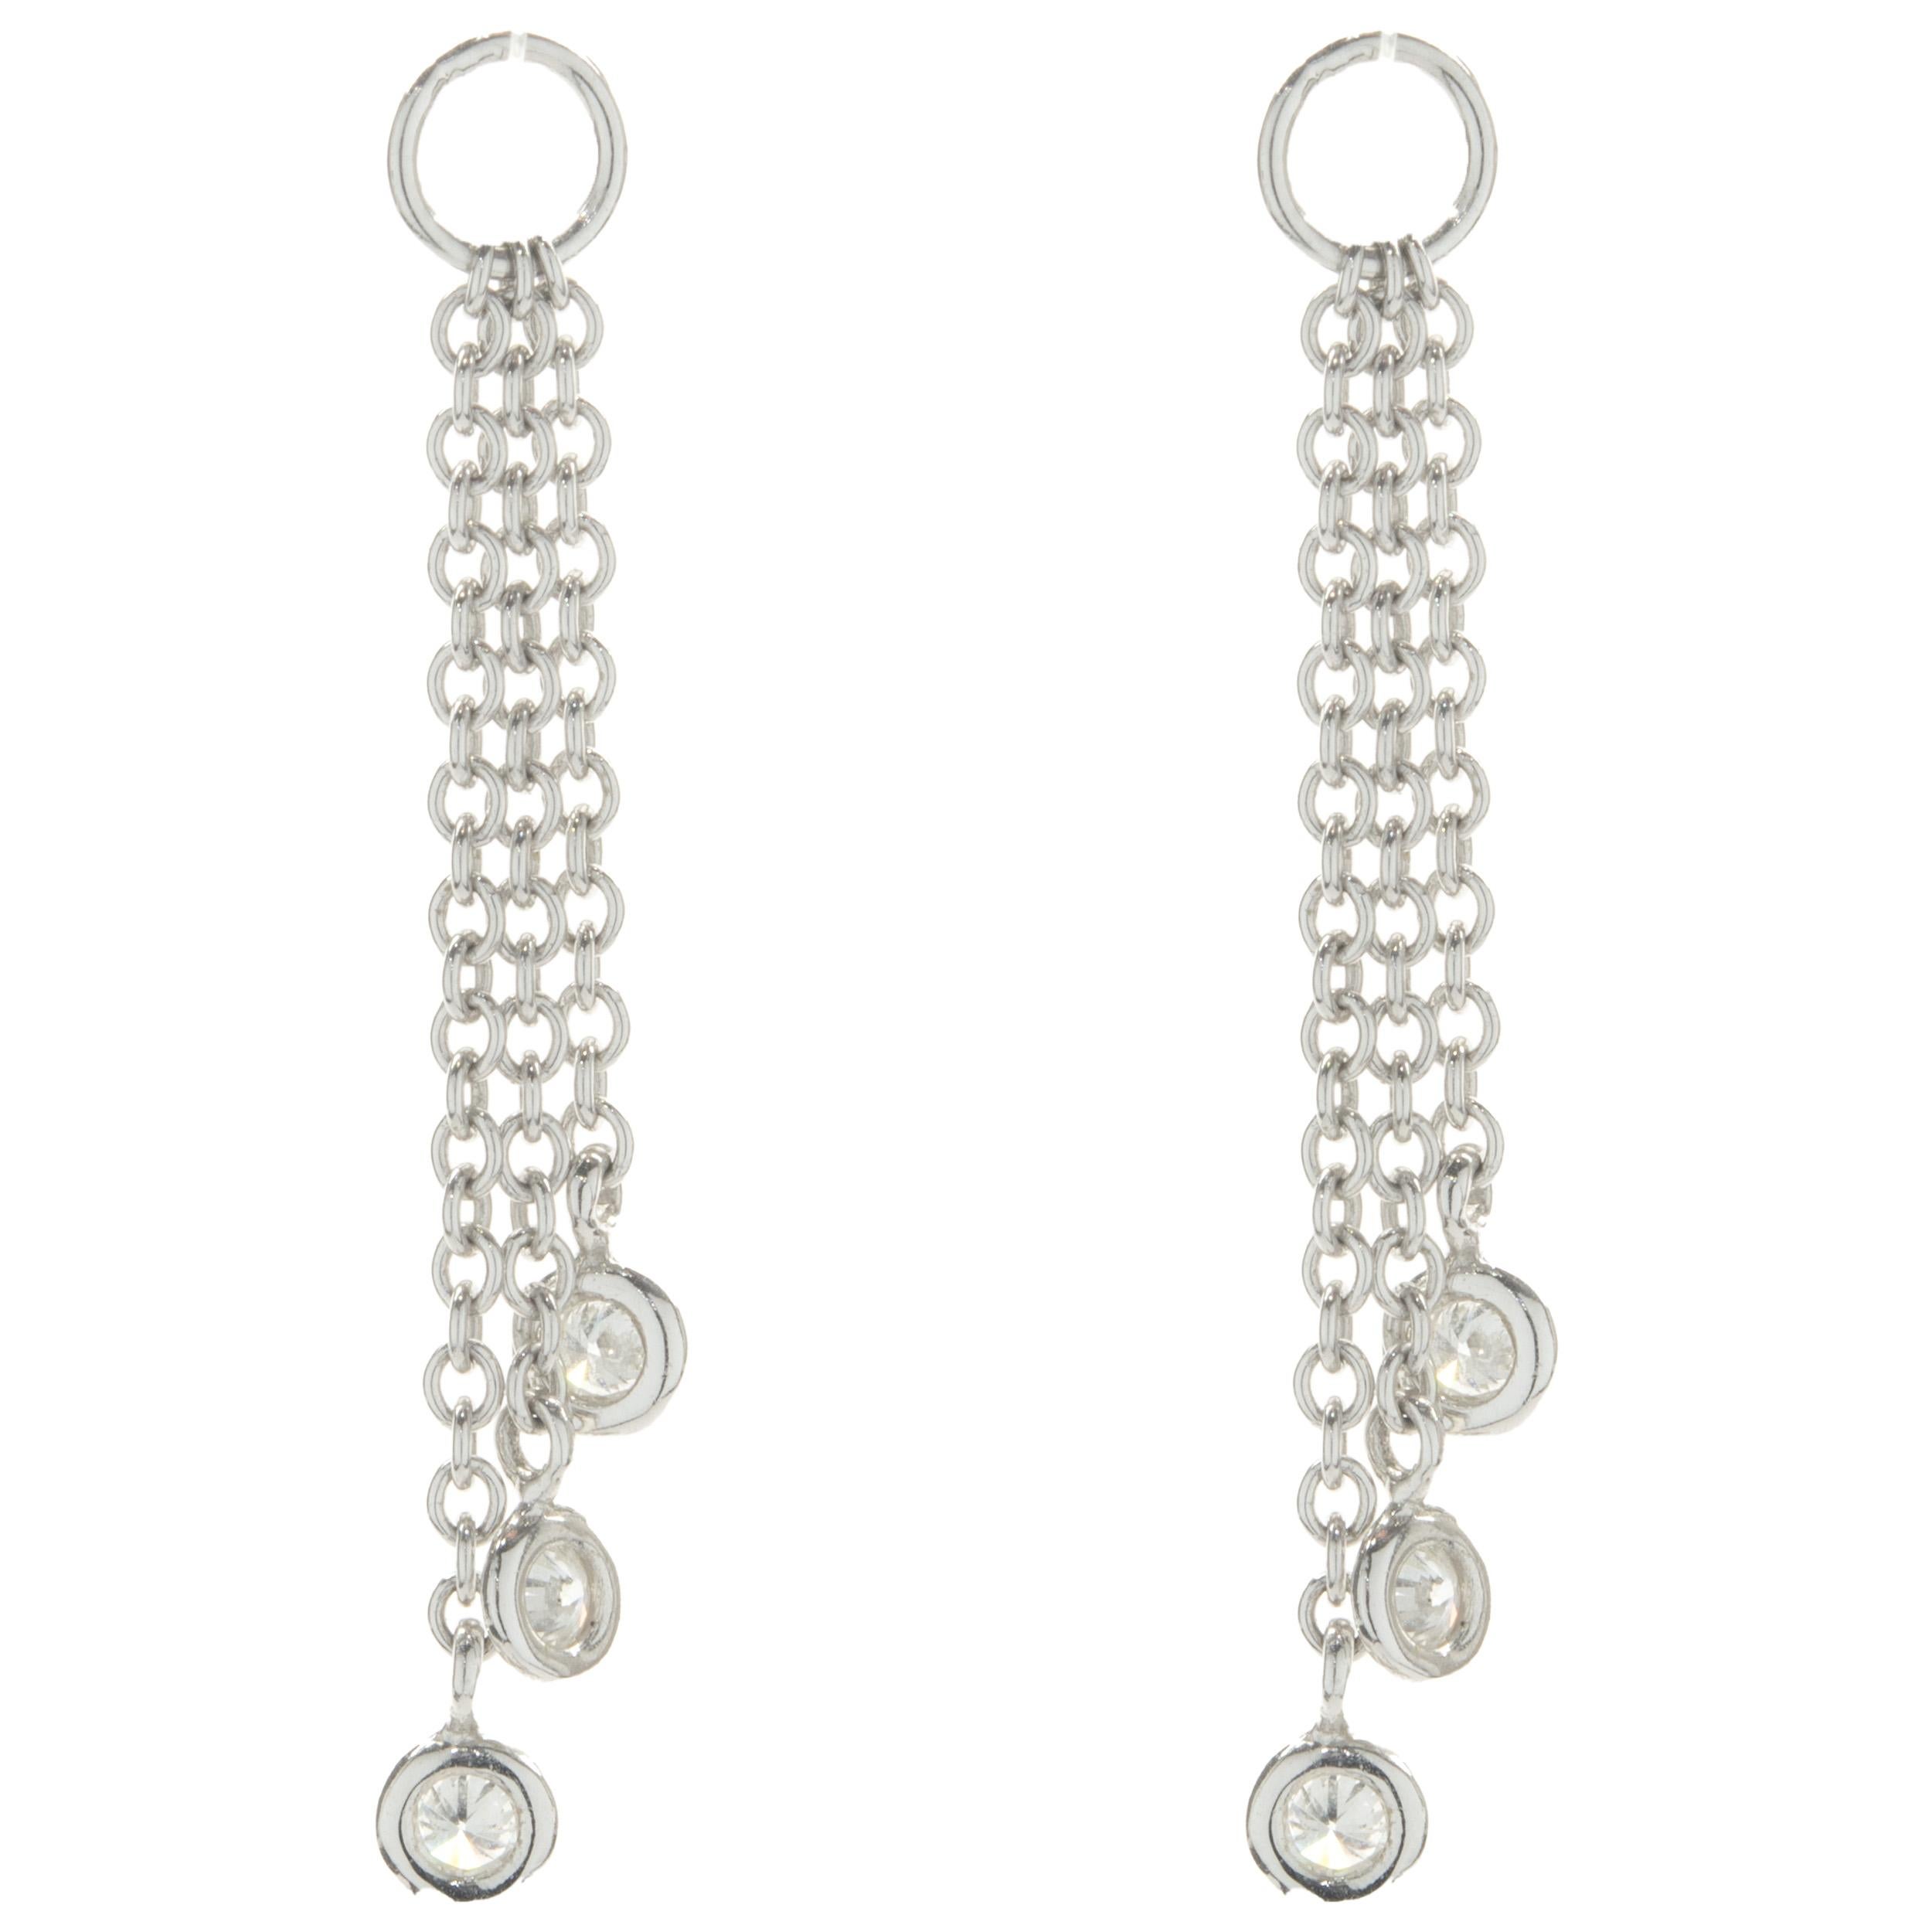 Designer: custom design
Material: 14K white gold
Diamonds: 6 round brilliant cut = 0.36cttw
Color: G
Clarity: SI1
Dimensions: earrings measure 34mm in length
Weight: 1.56 grams